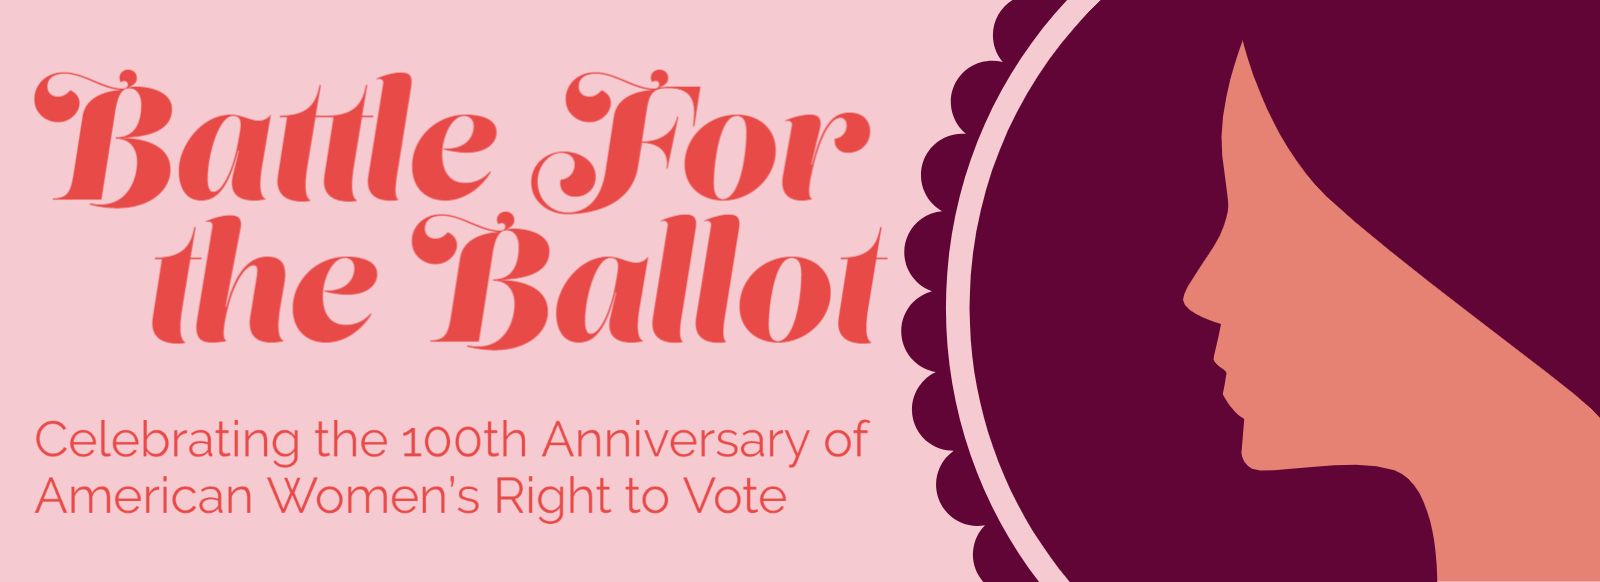 Battle for the Ballot: Celebrating the 100th Anniversary of American Women's Right to Vote